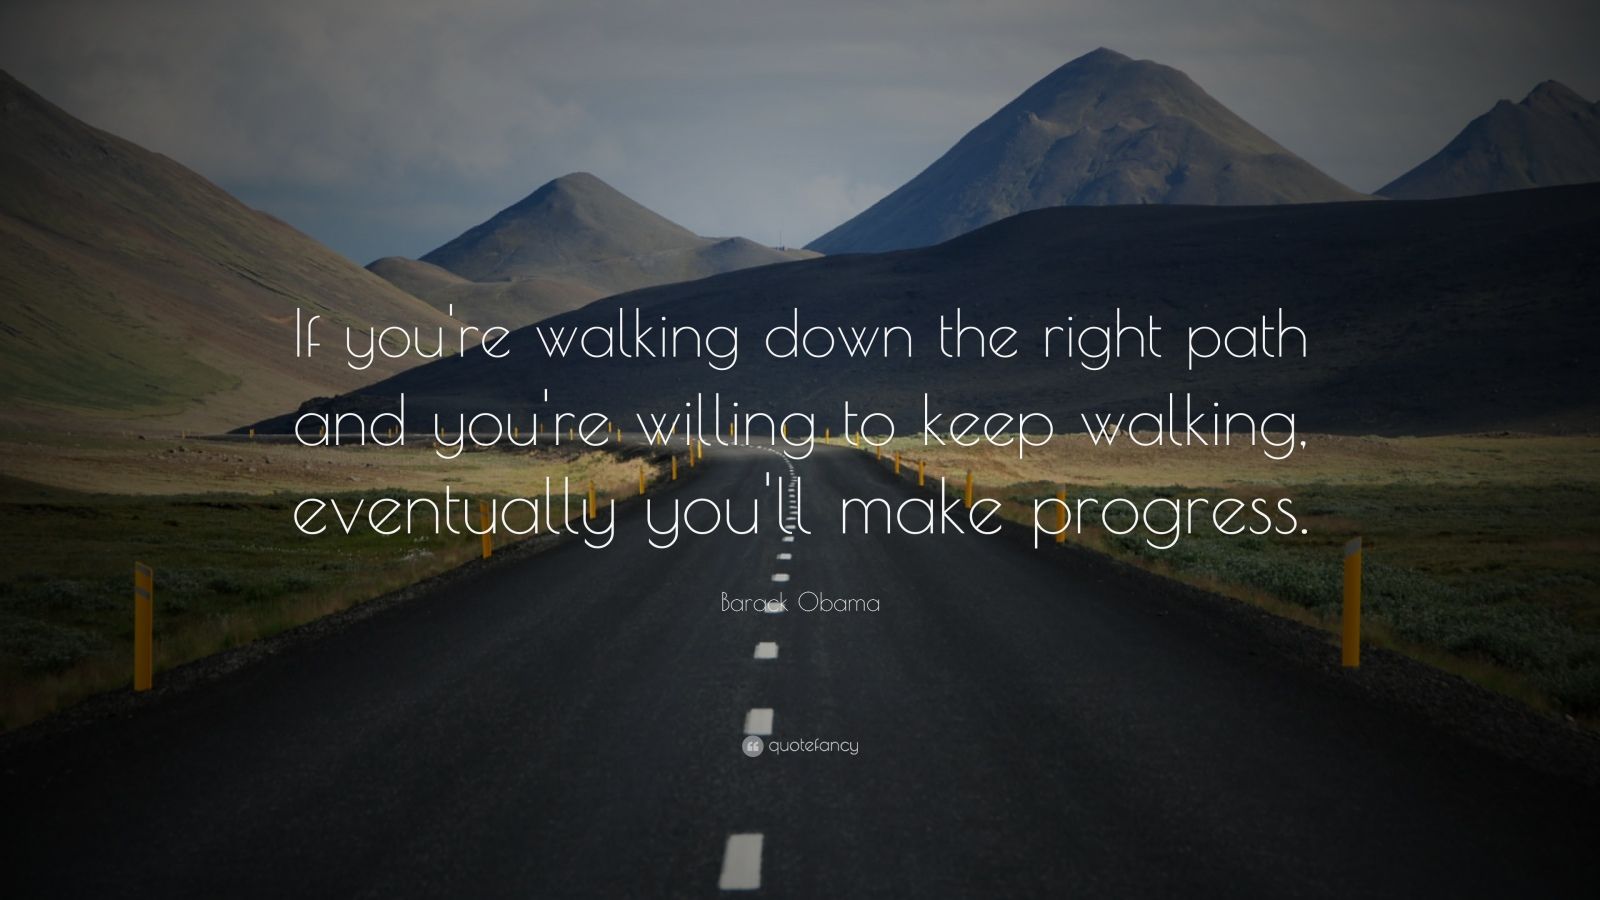 Barack Obama Quote: “If you're walking down the right path and you're